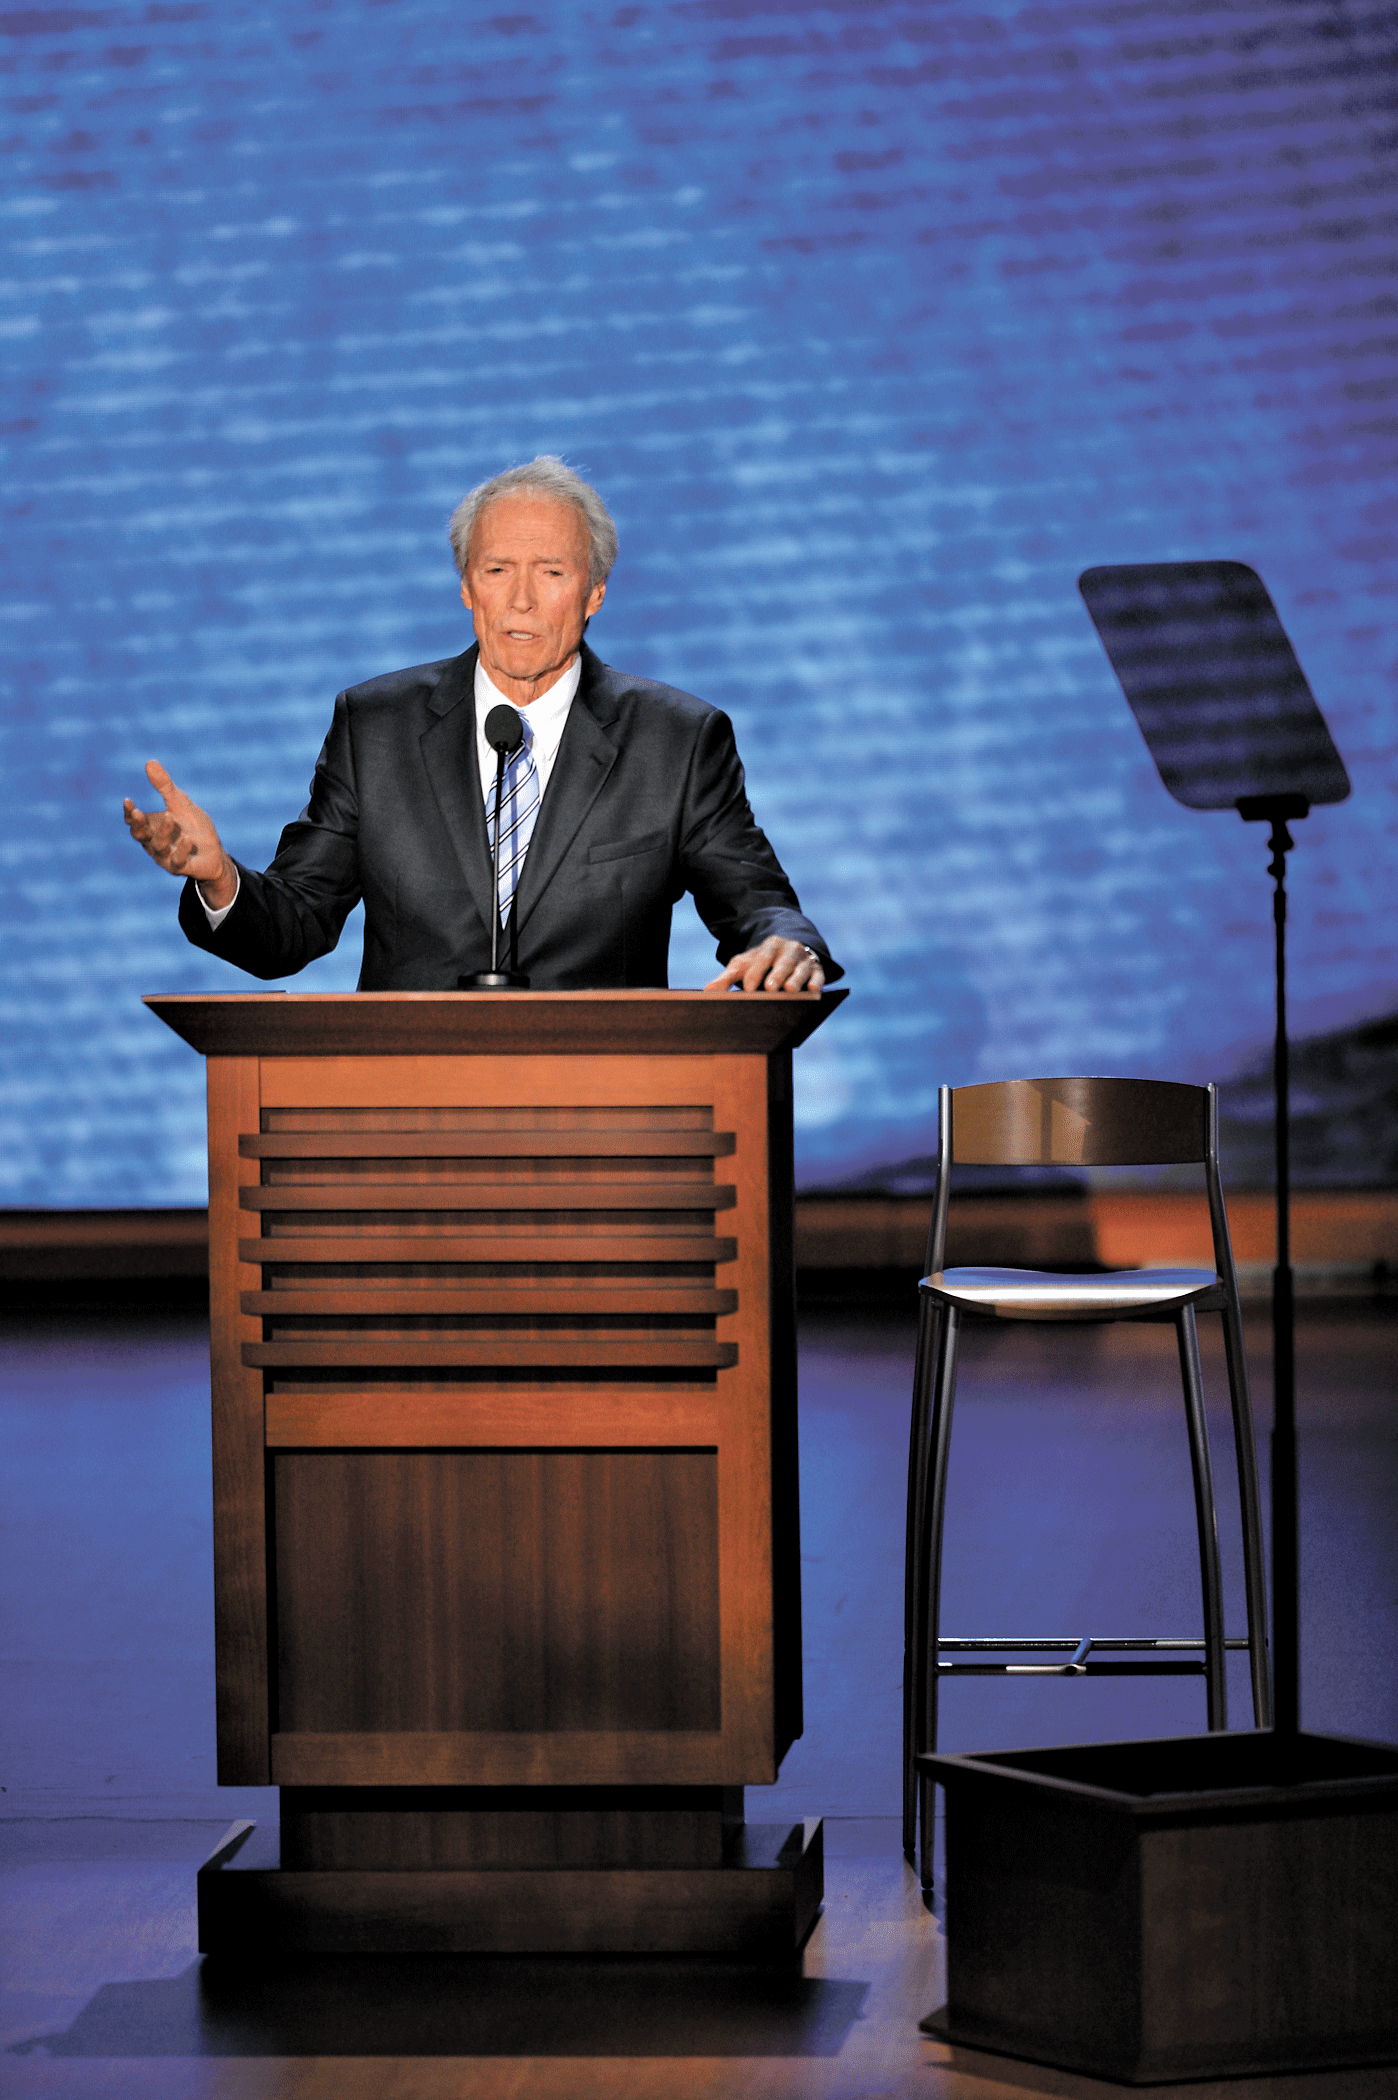 Clint Eastwood No Regrets Over Convention Speech